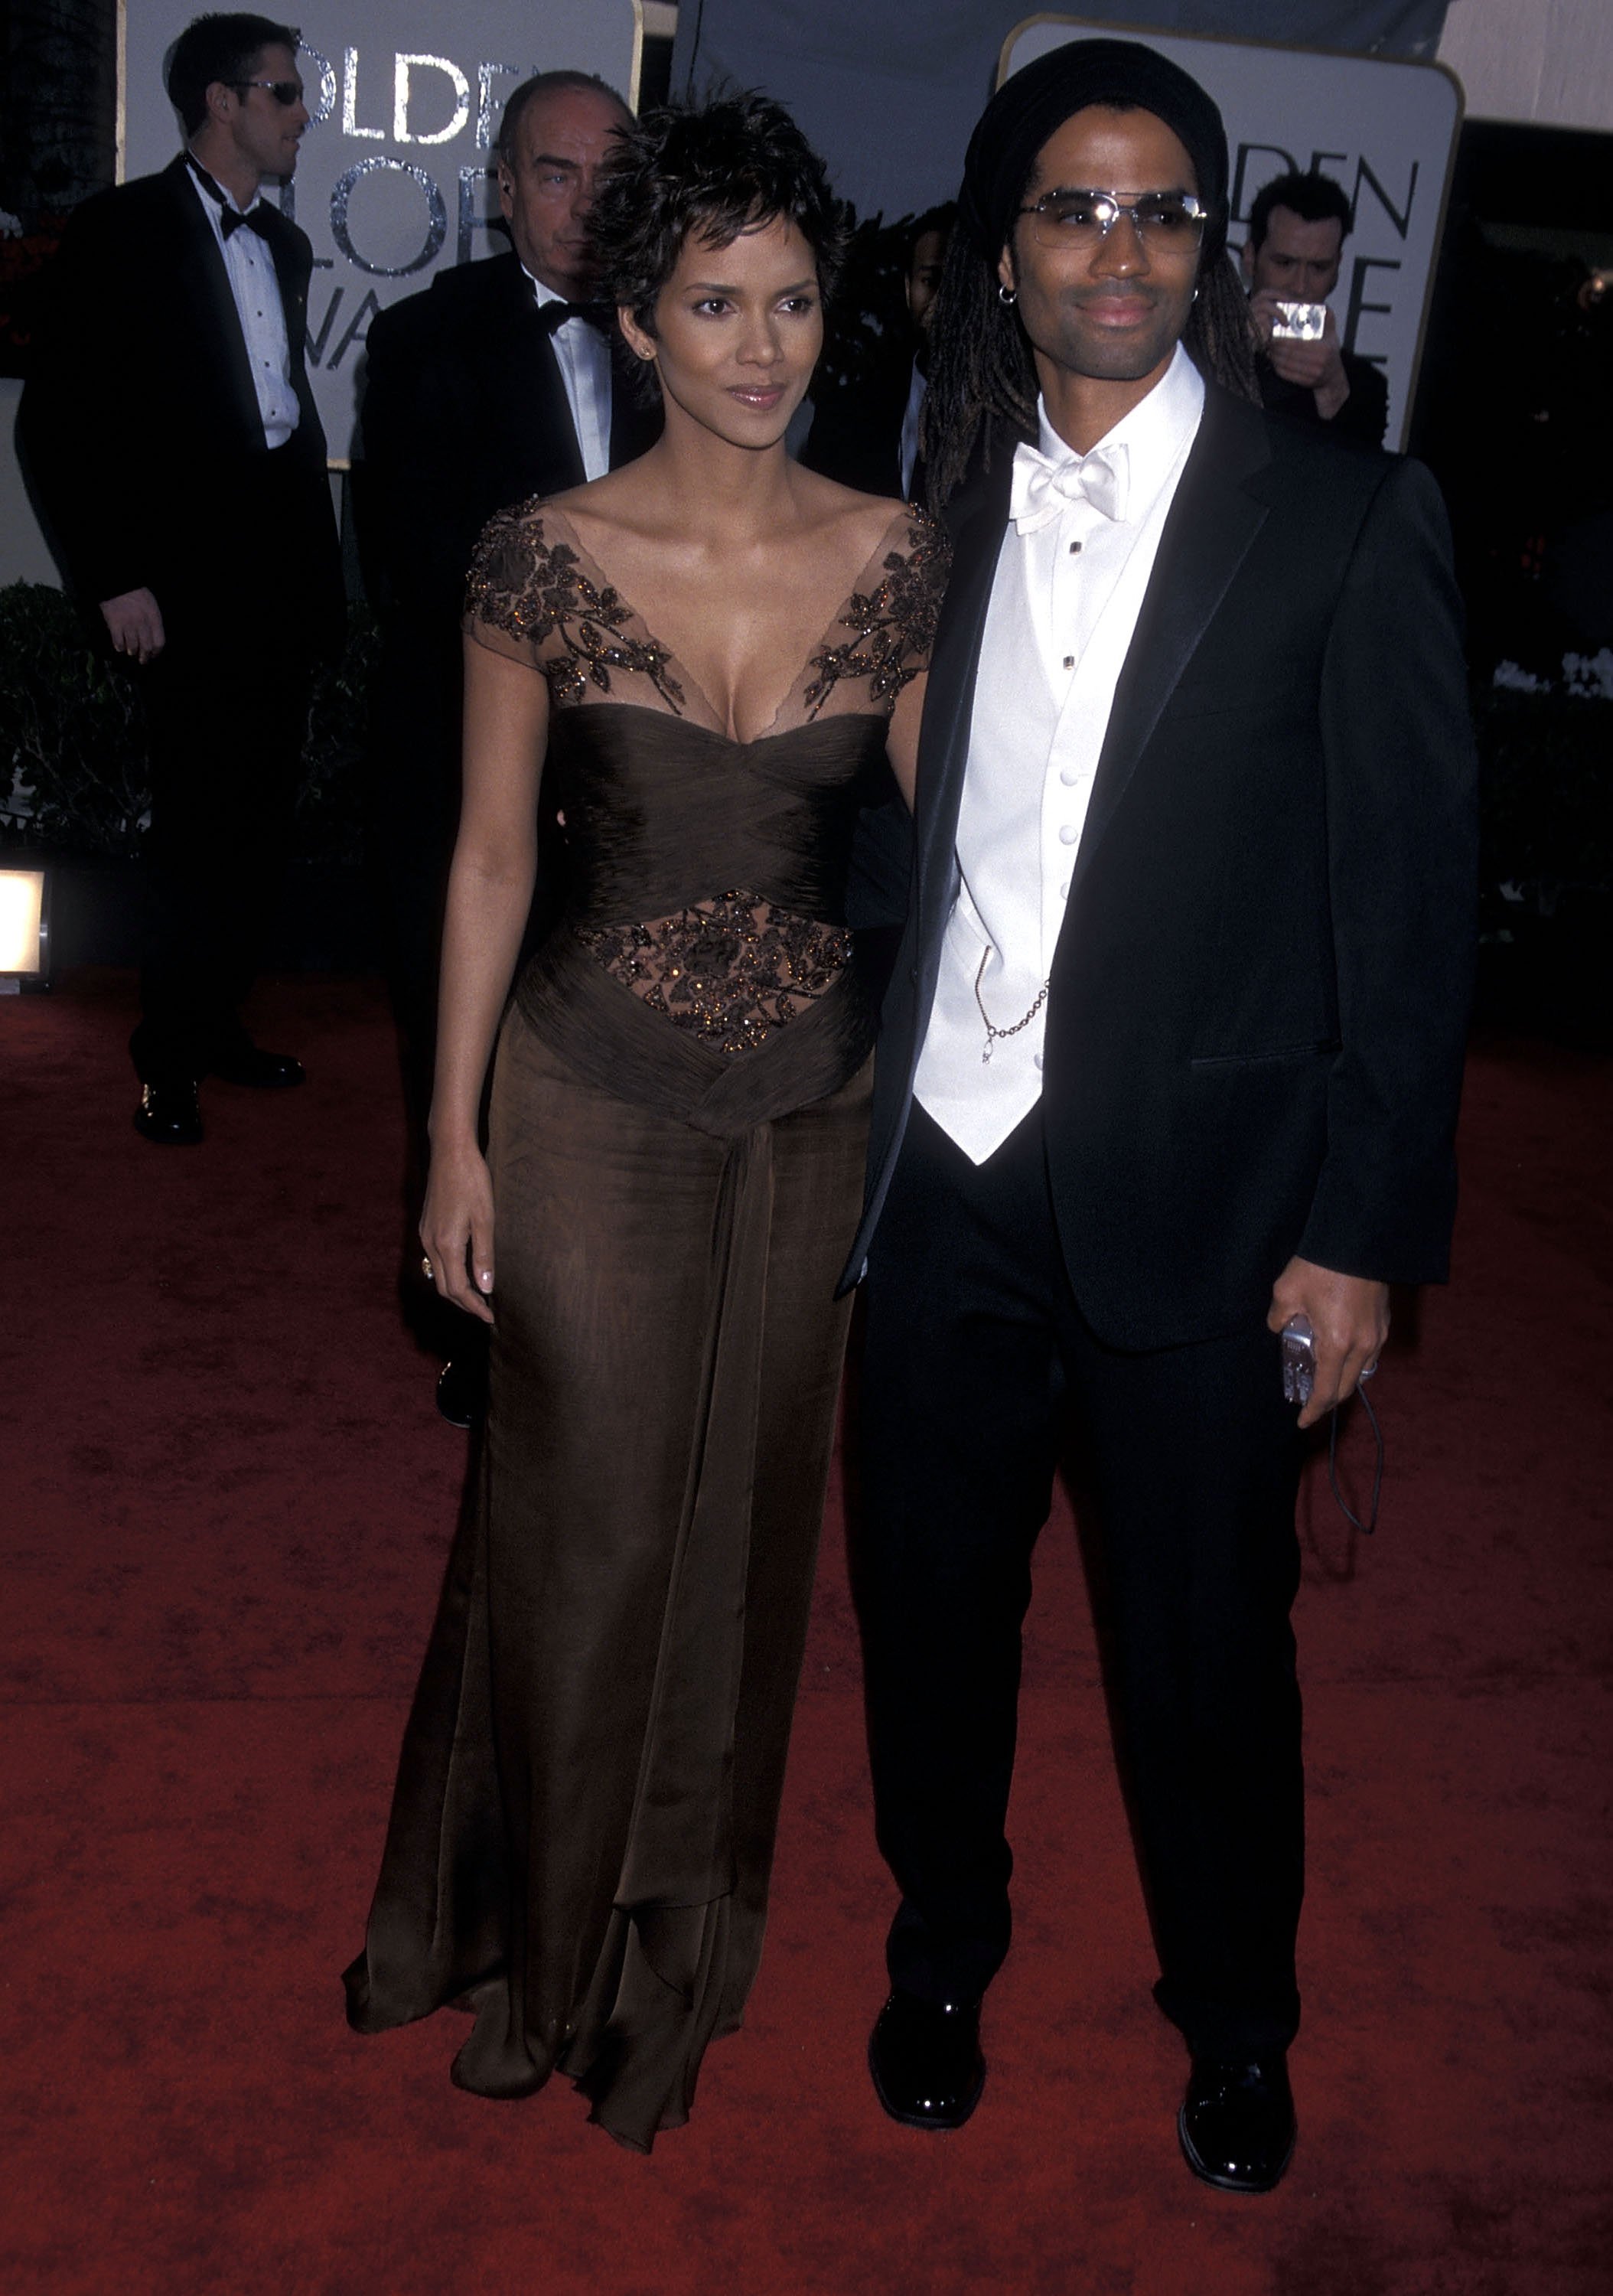 Halle Berry and Eric Benet at the 59th Annual Golden Globe Awards in 2002 at Beverly Hilton Hotel in Beverly Hills, California | Photo: Ron Galella, Ltd./Ron Galella Collection via Getty Images